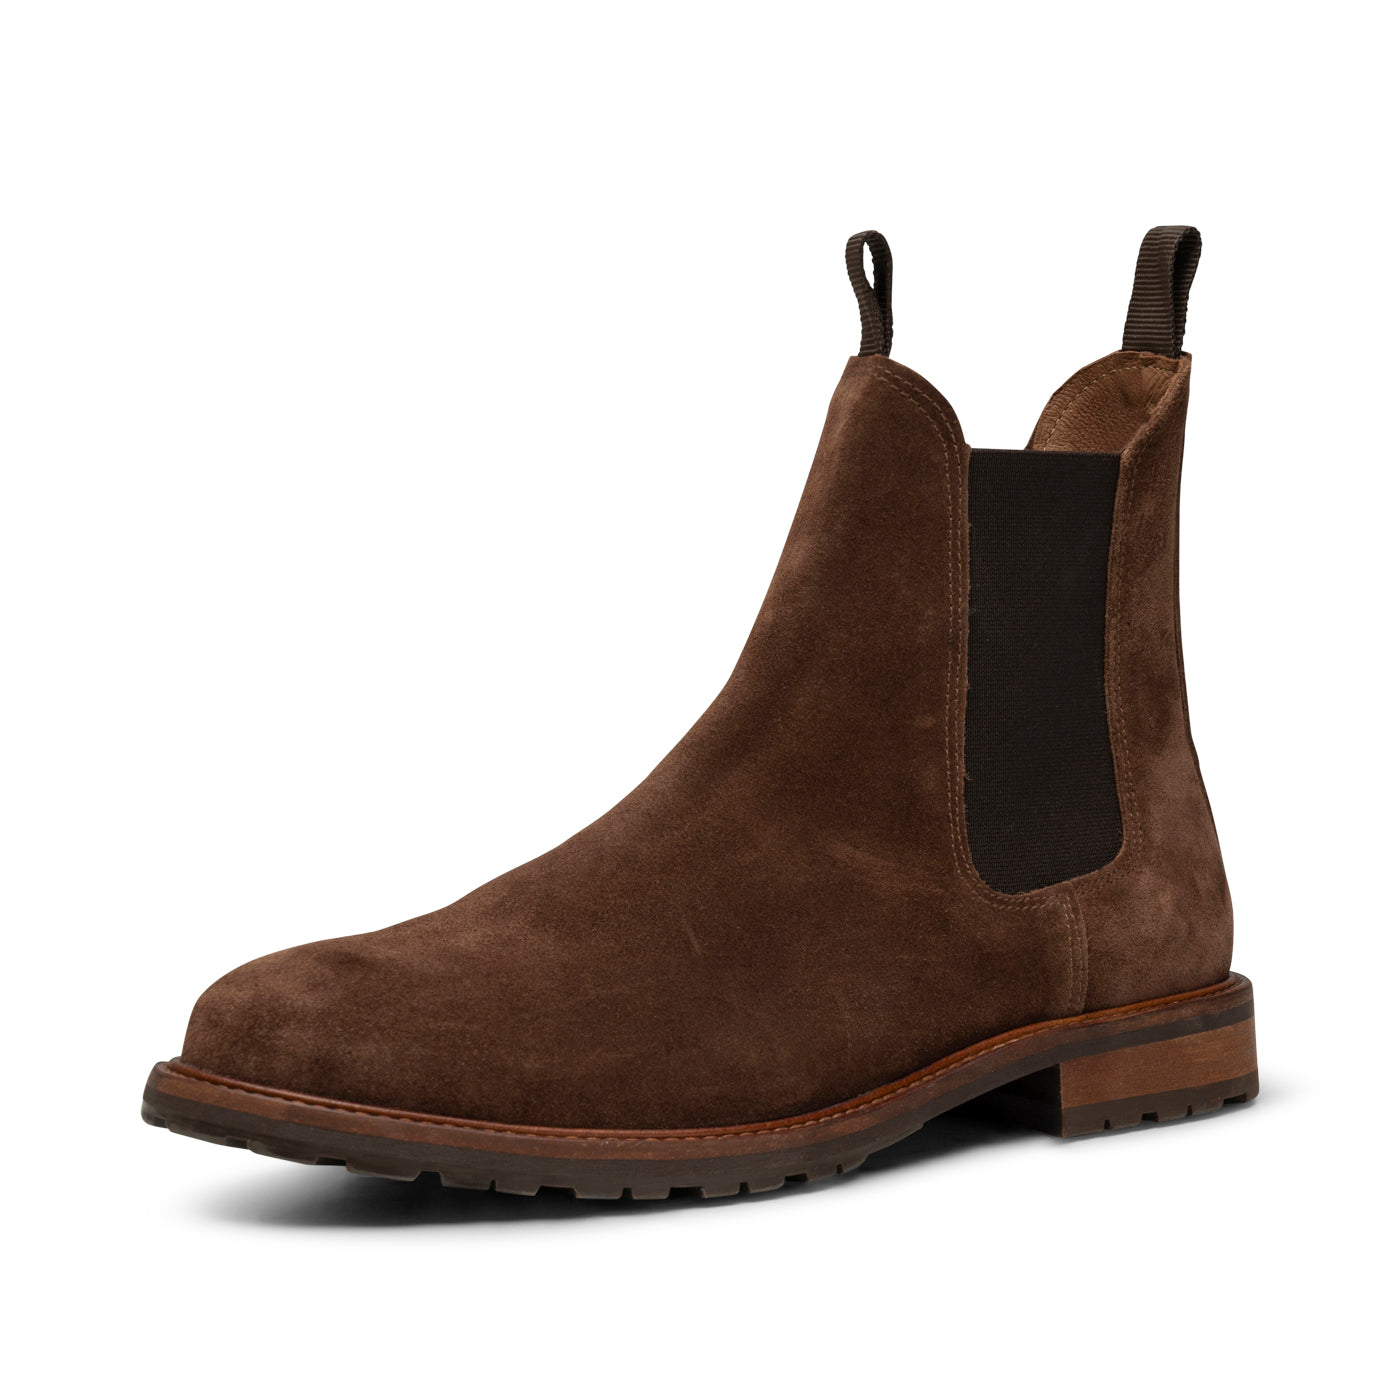 SHOE THE BEAR MENS York chelsea boot suede Boots 847 CHOC BROWN